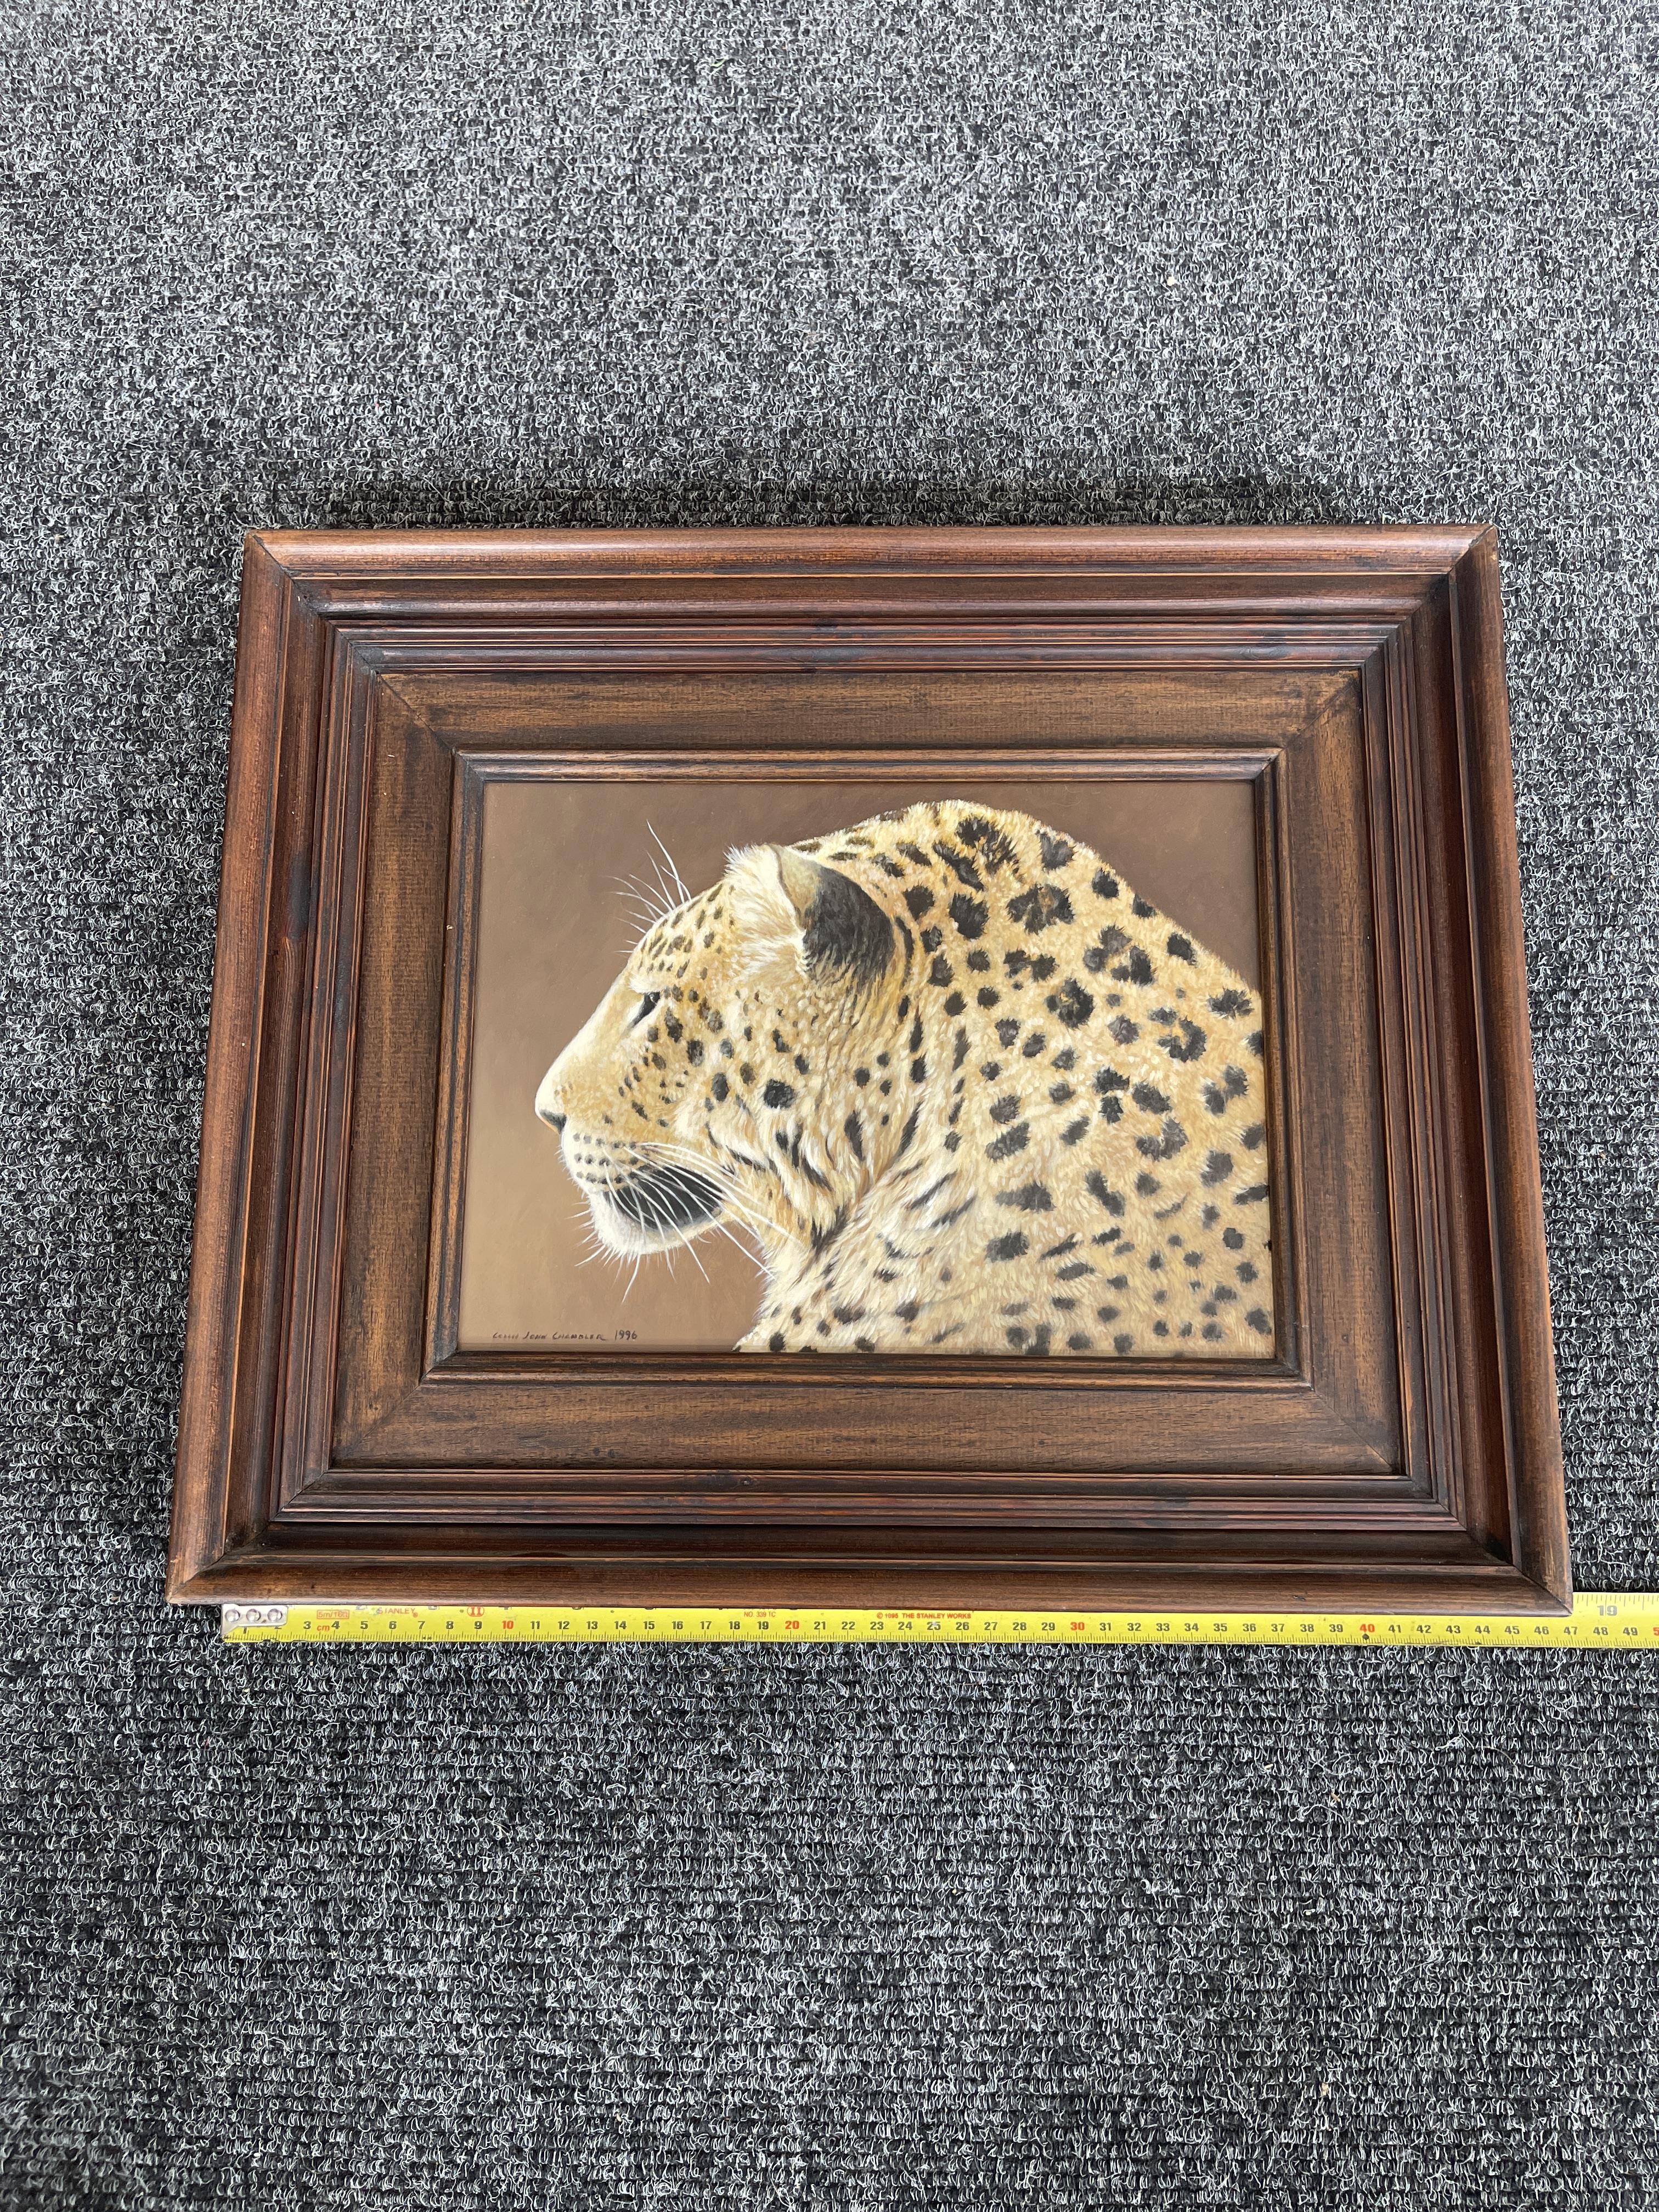 Signed and Framed Oil On Panel - Leopard - by Coli - Image 19 of 22